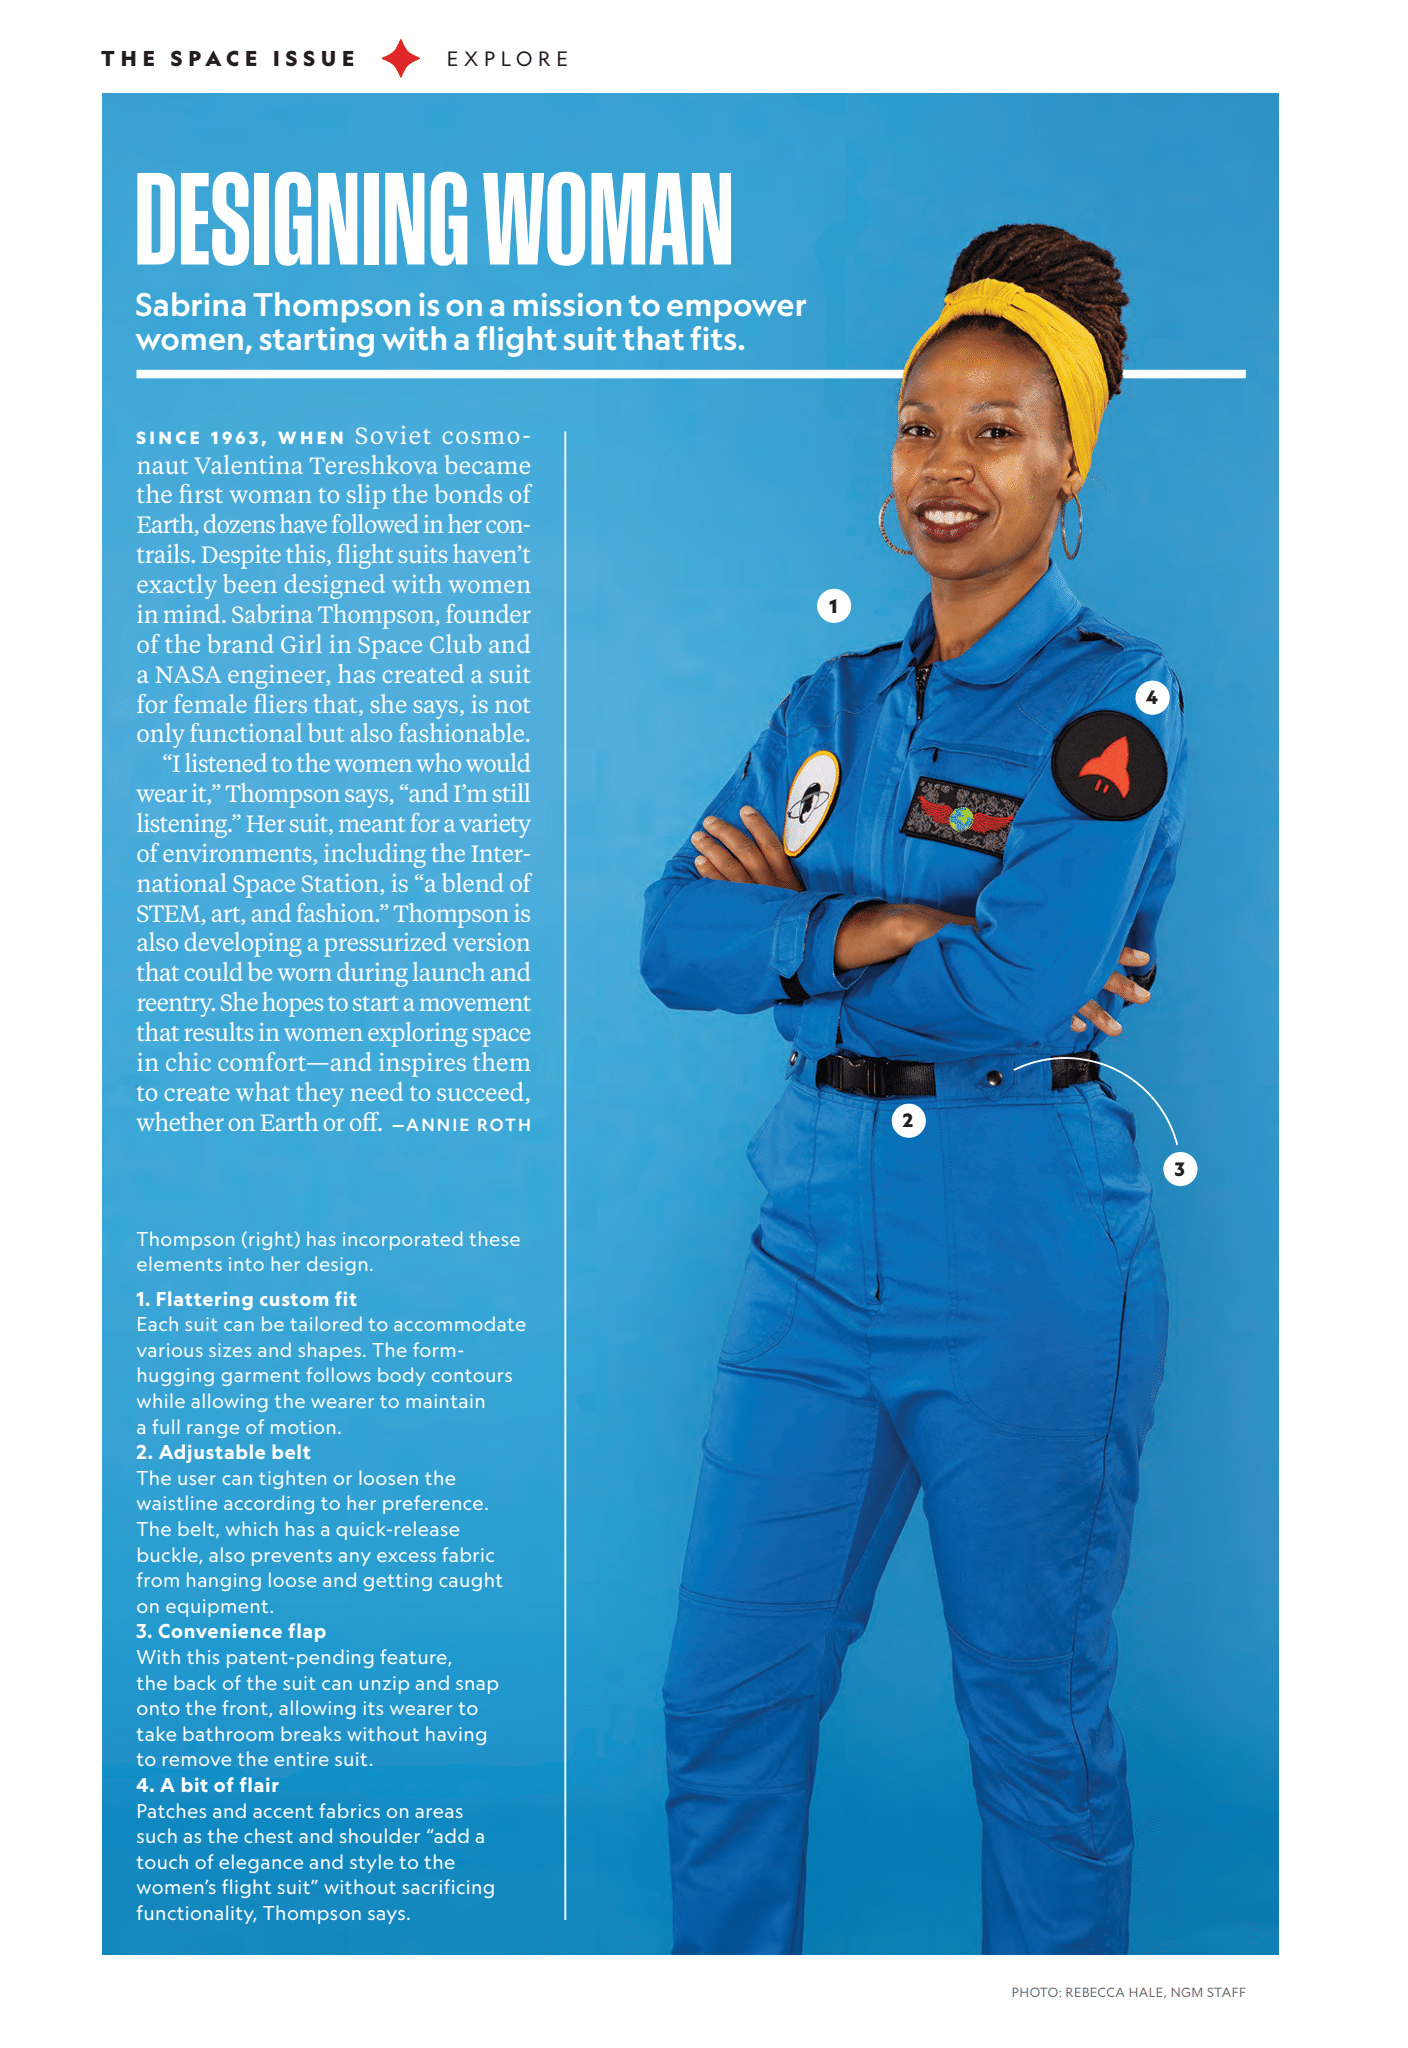 A Black Woman Is Designing For Future Female Astronauts —Here’s Her Story